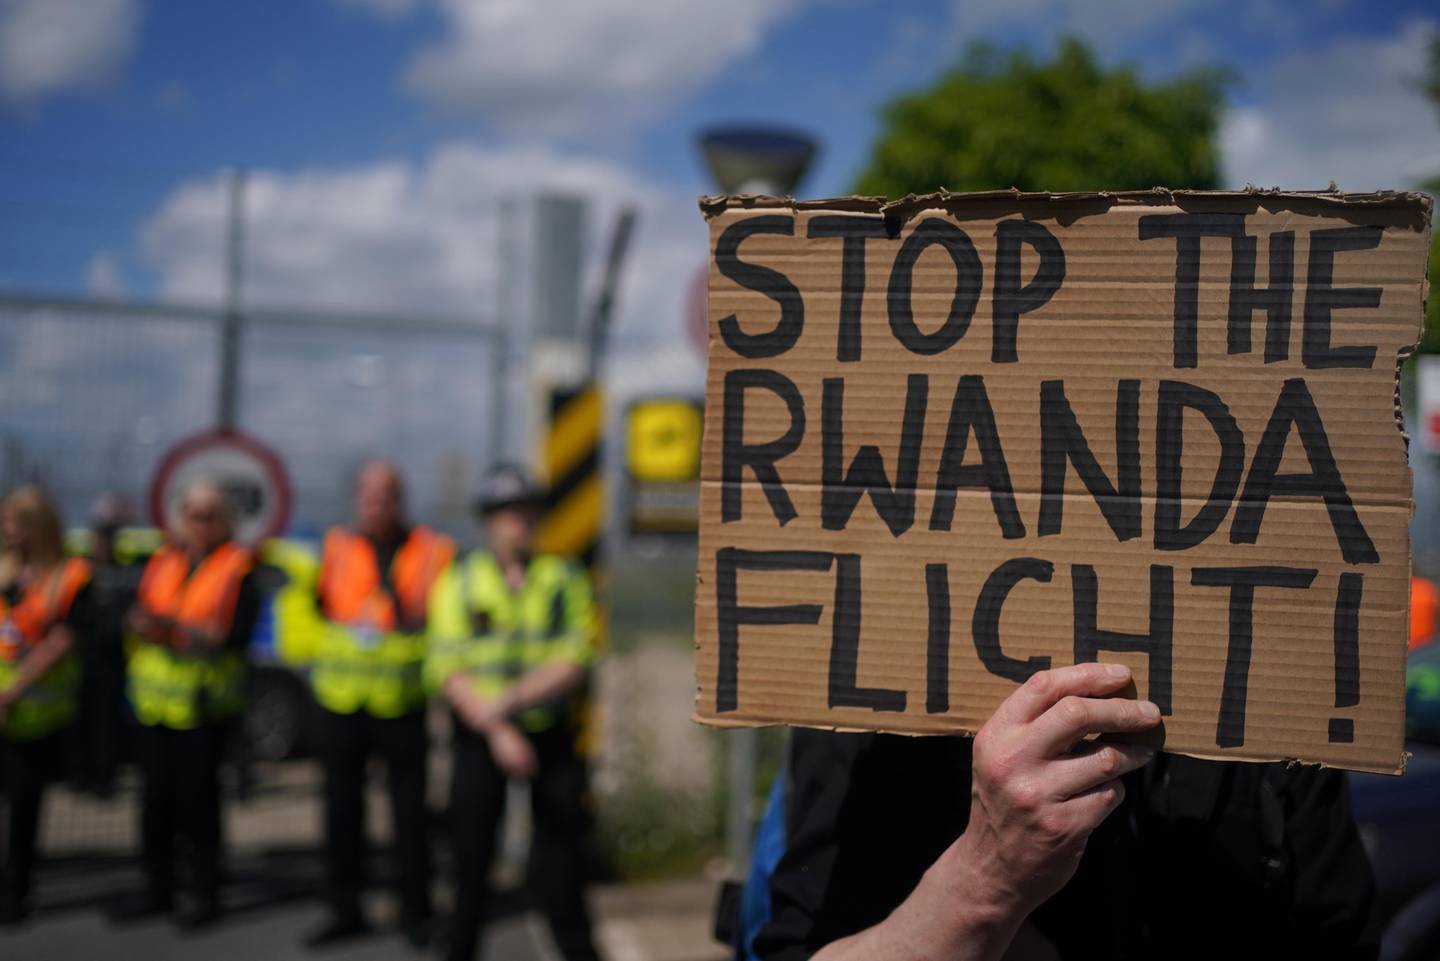 Demonstrators at a removal center in Gatwick protest against plans to send migrants to Rwanda.